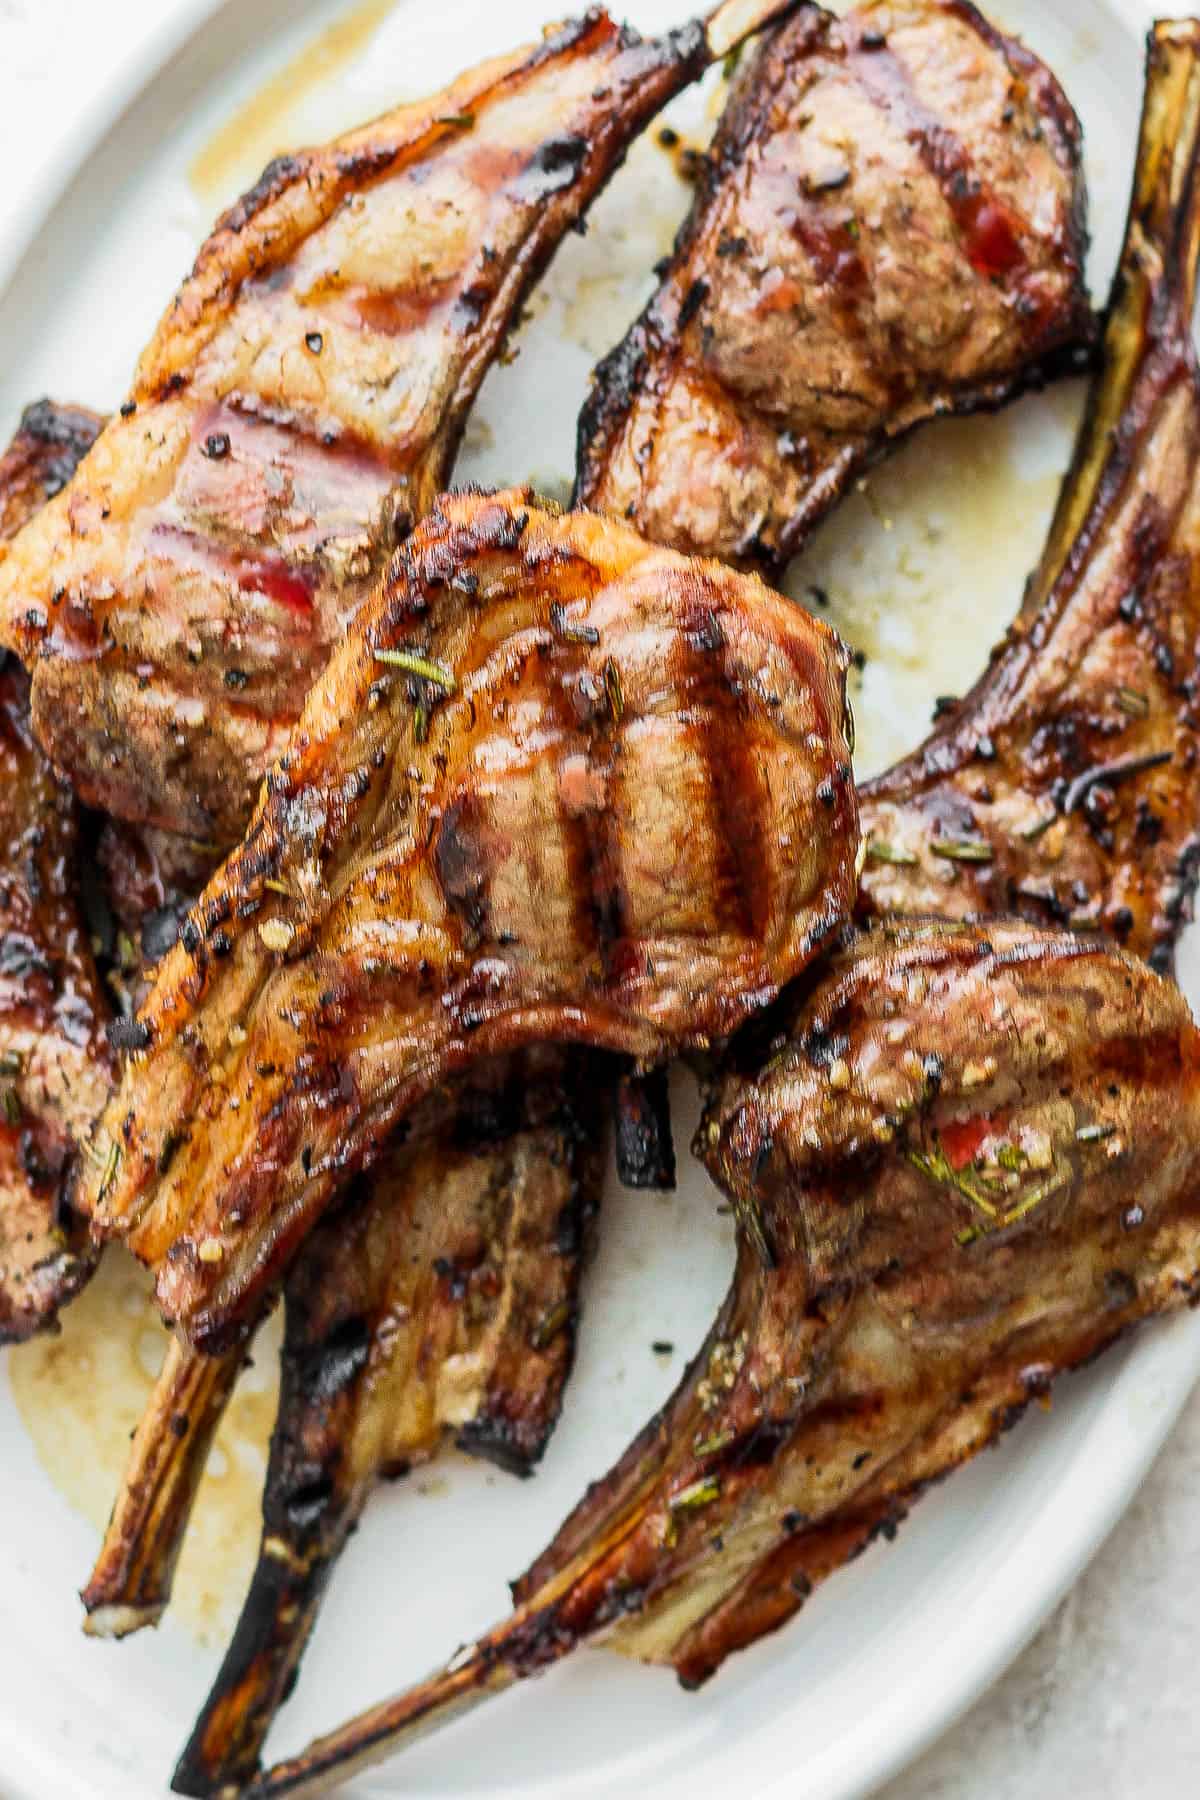 Grilled lamb chops on a plate.